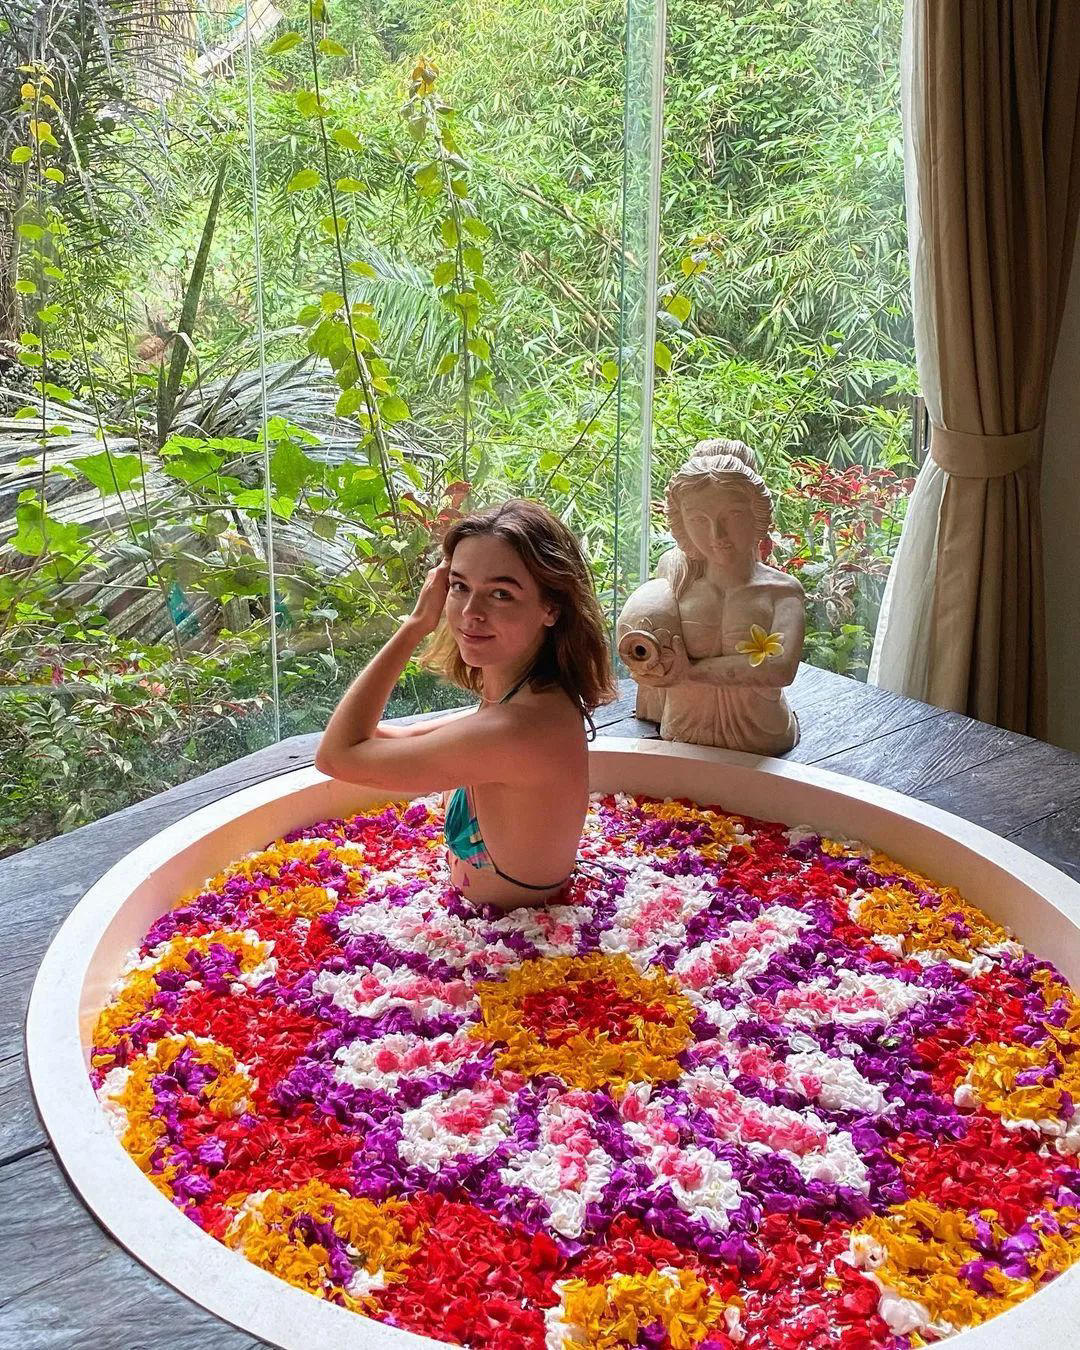 Delicate and intricately laid flower bath is certainly a treat to your sight and all the way to your